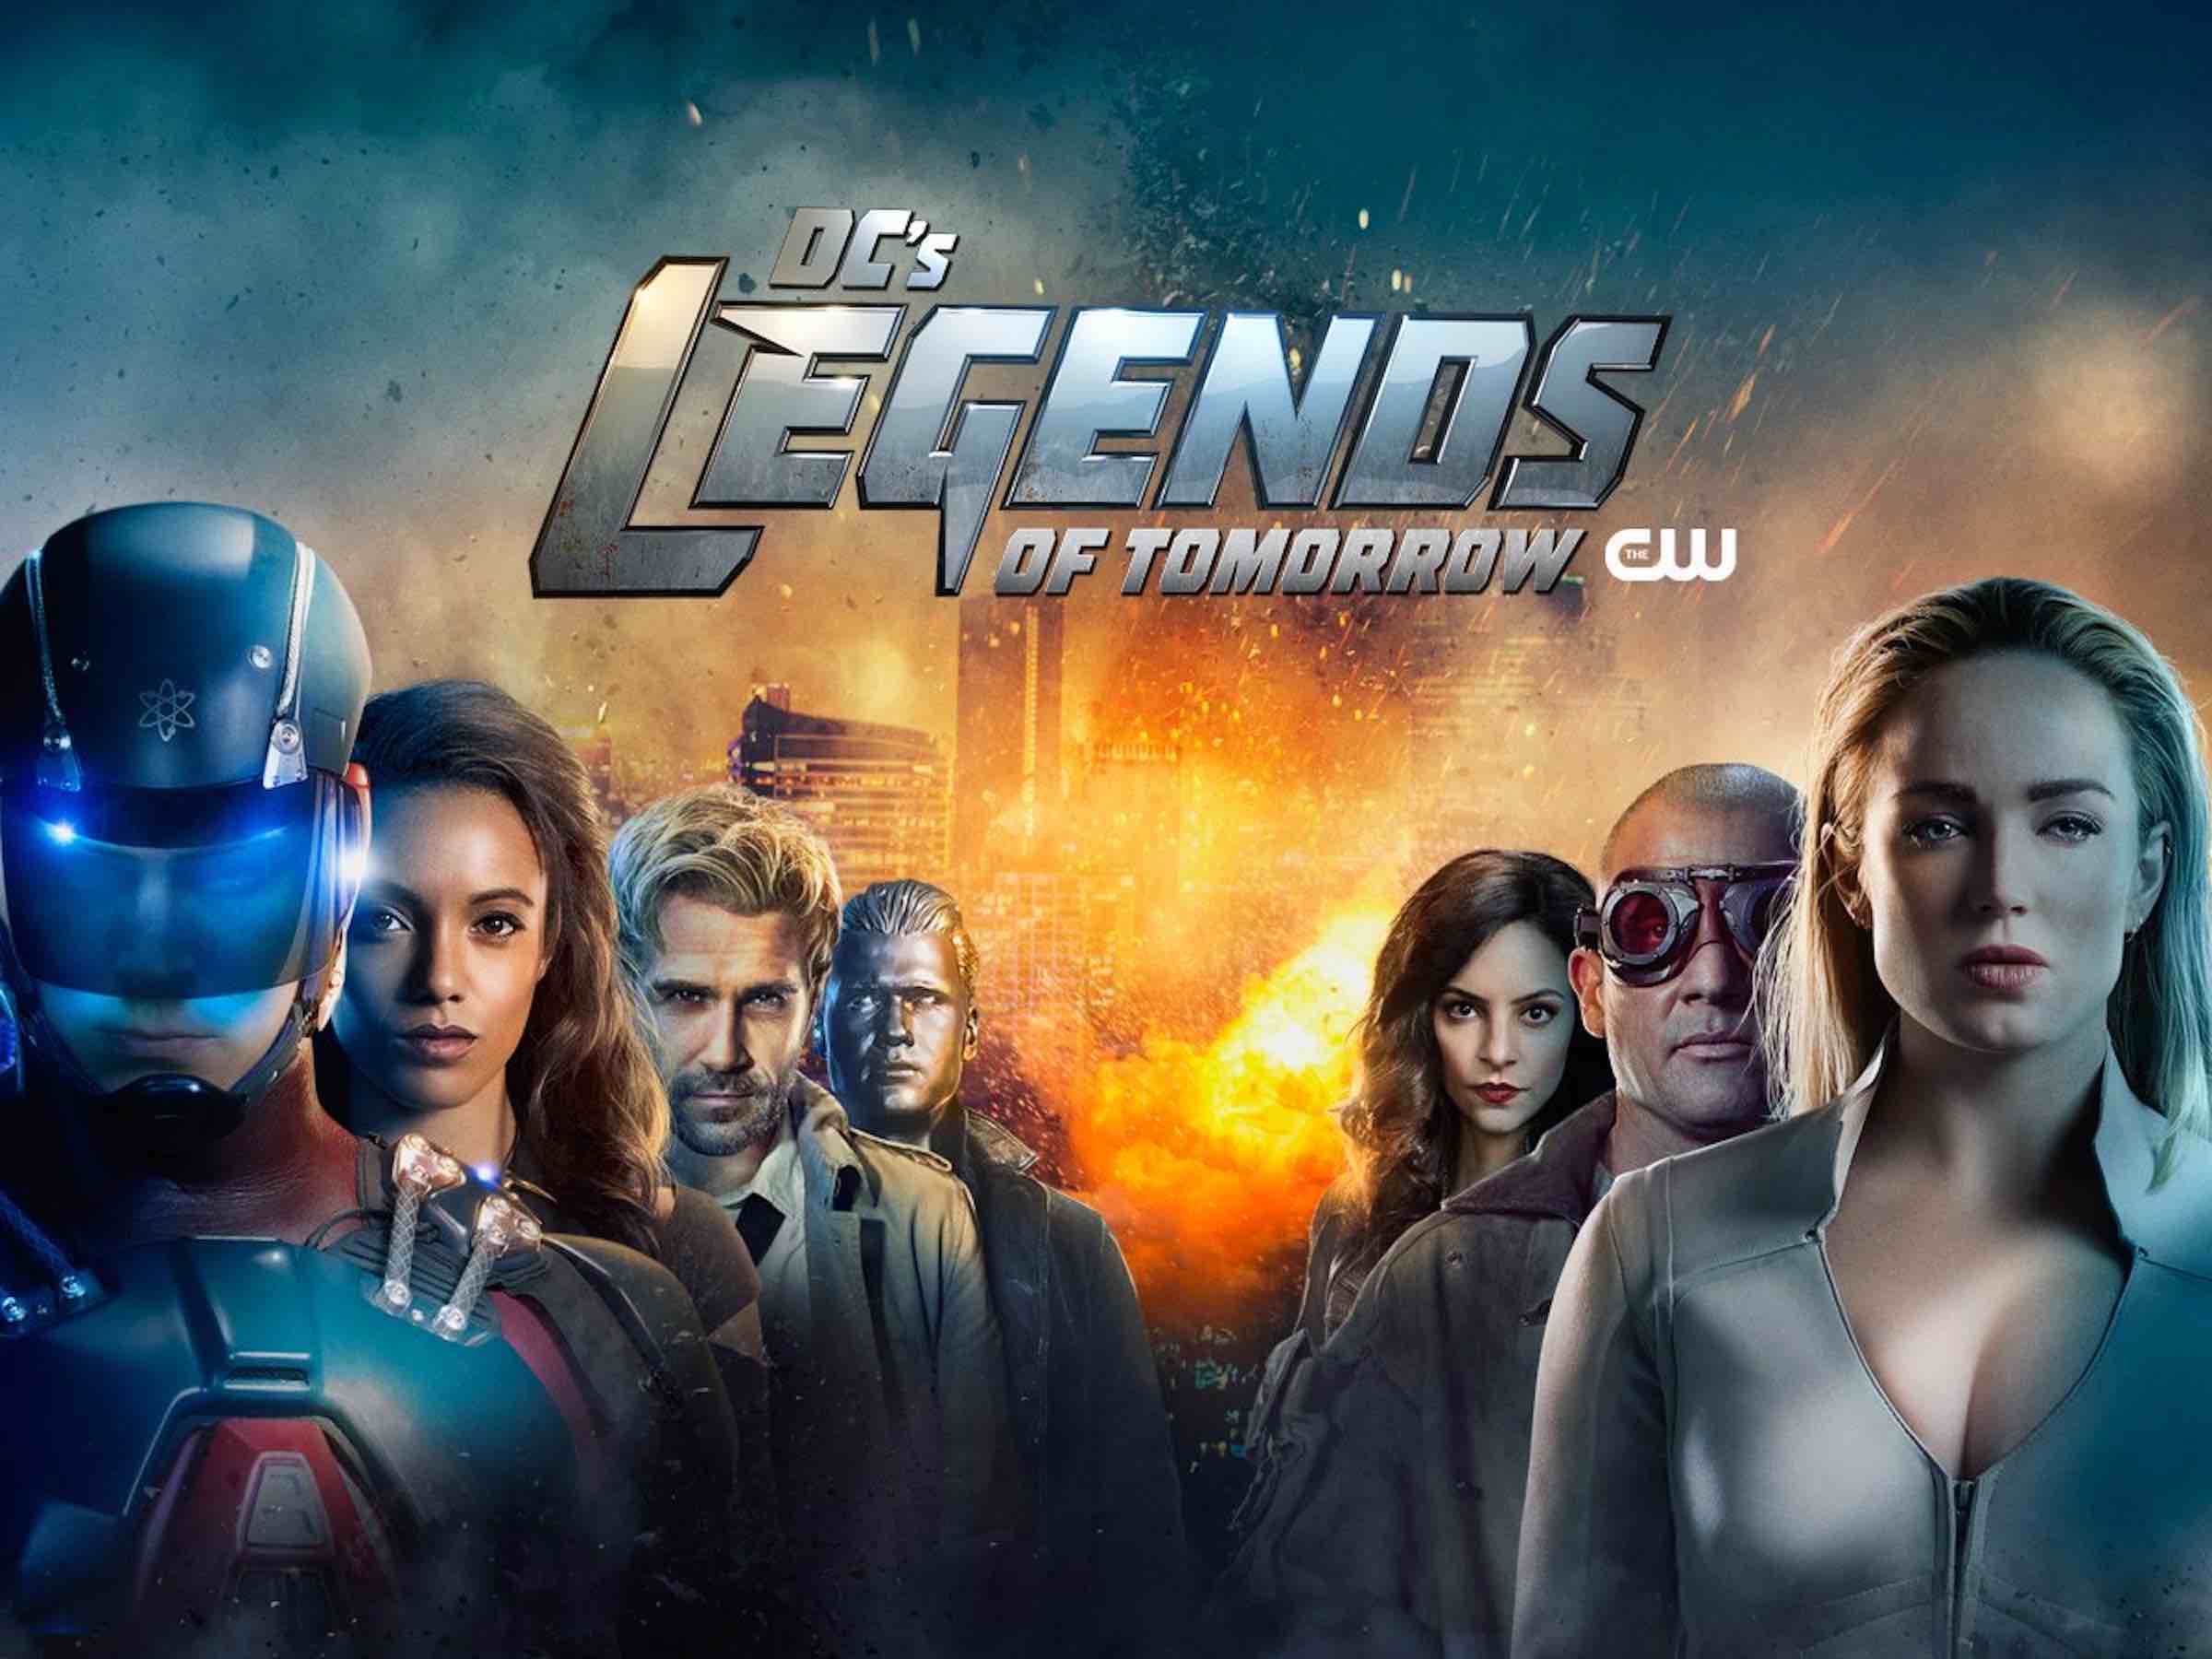 DC's Legends of Tomorrow with Caity Lotz.